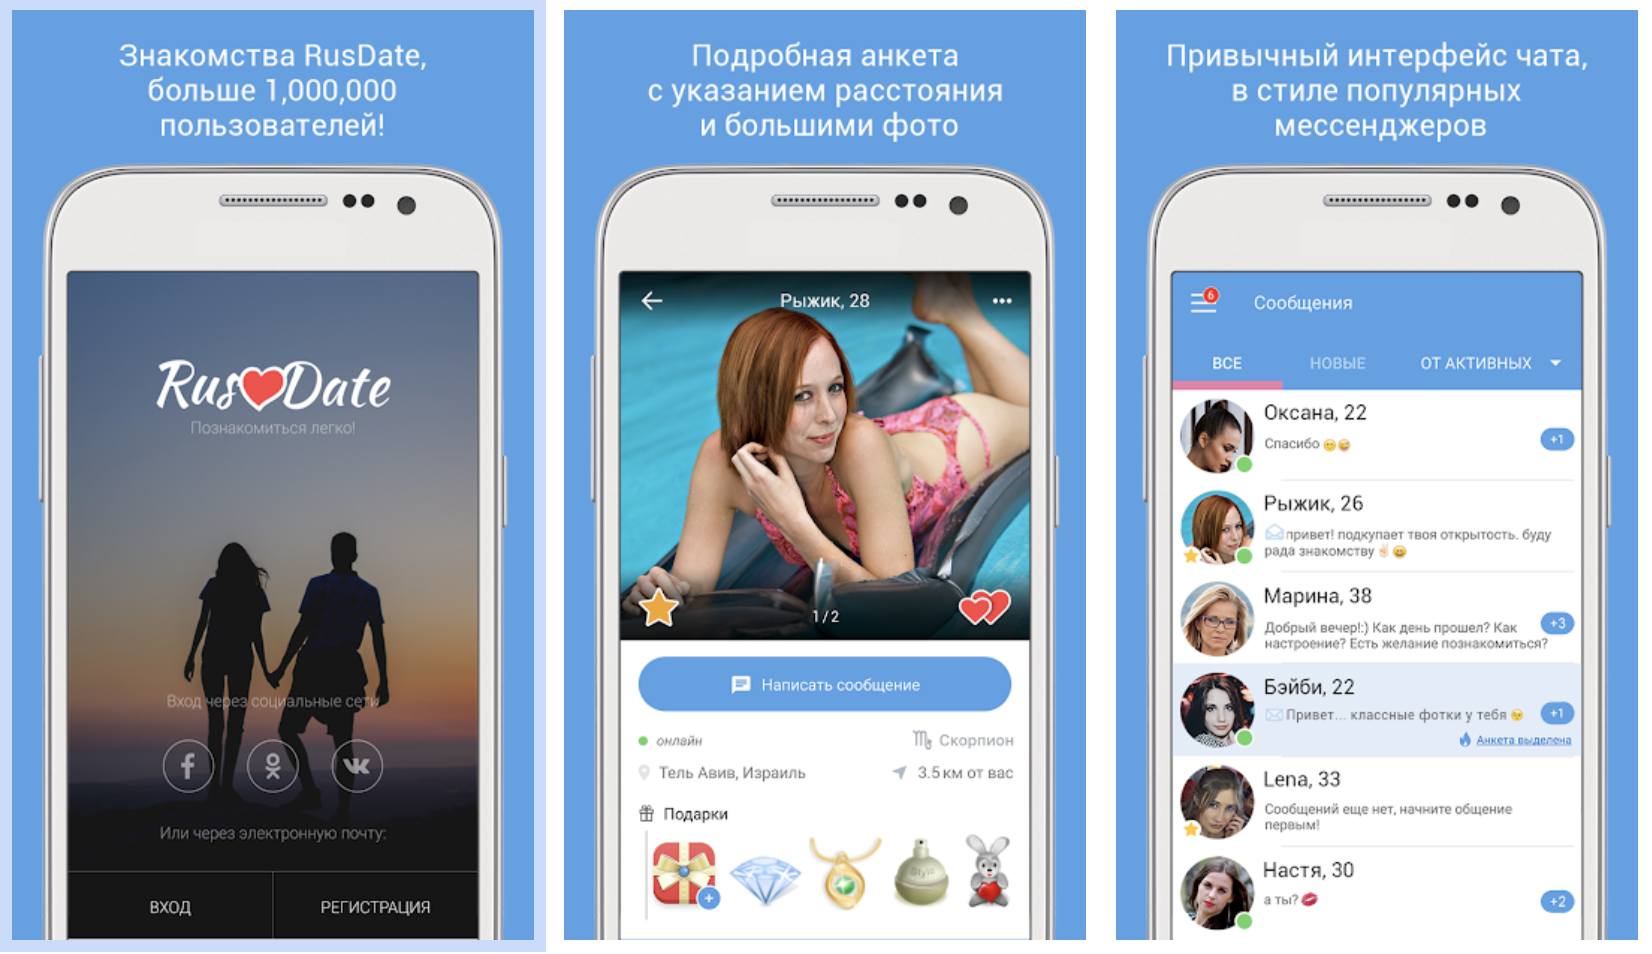 RusDate is a dating application with wide functionality 